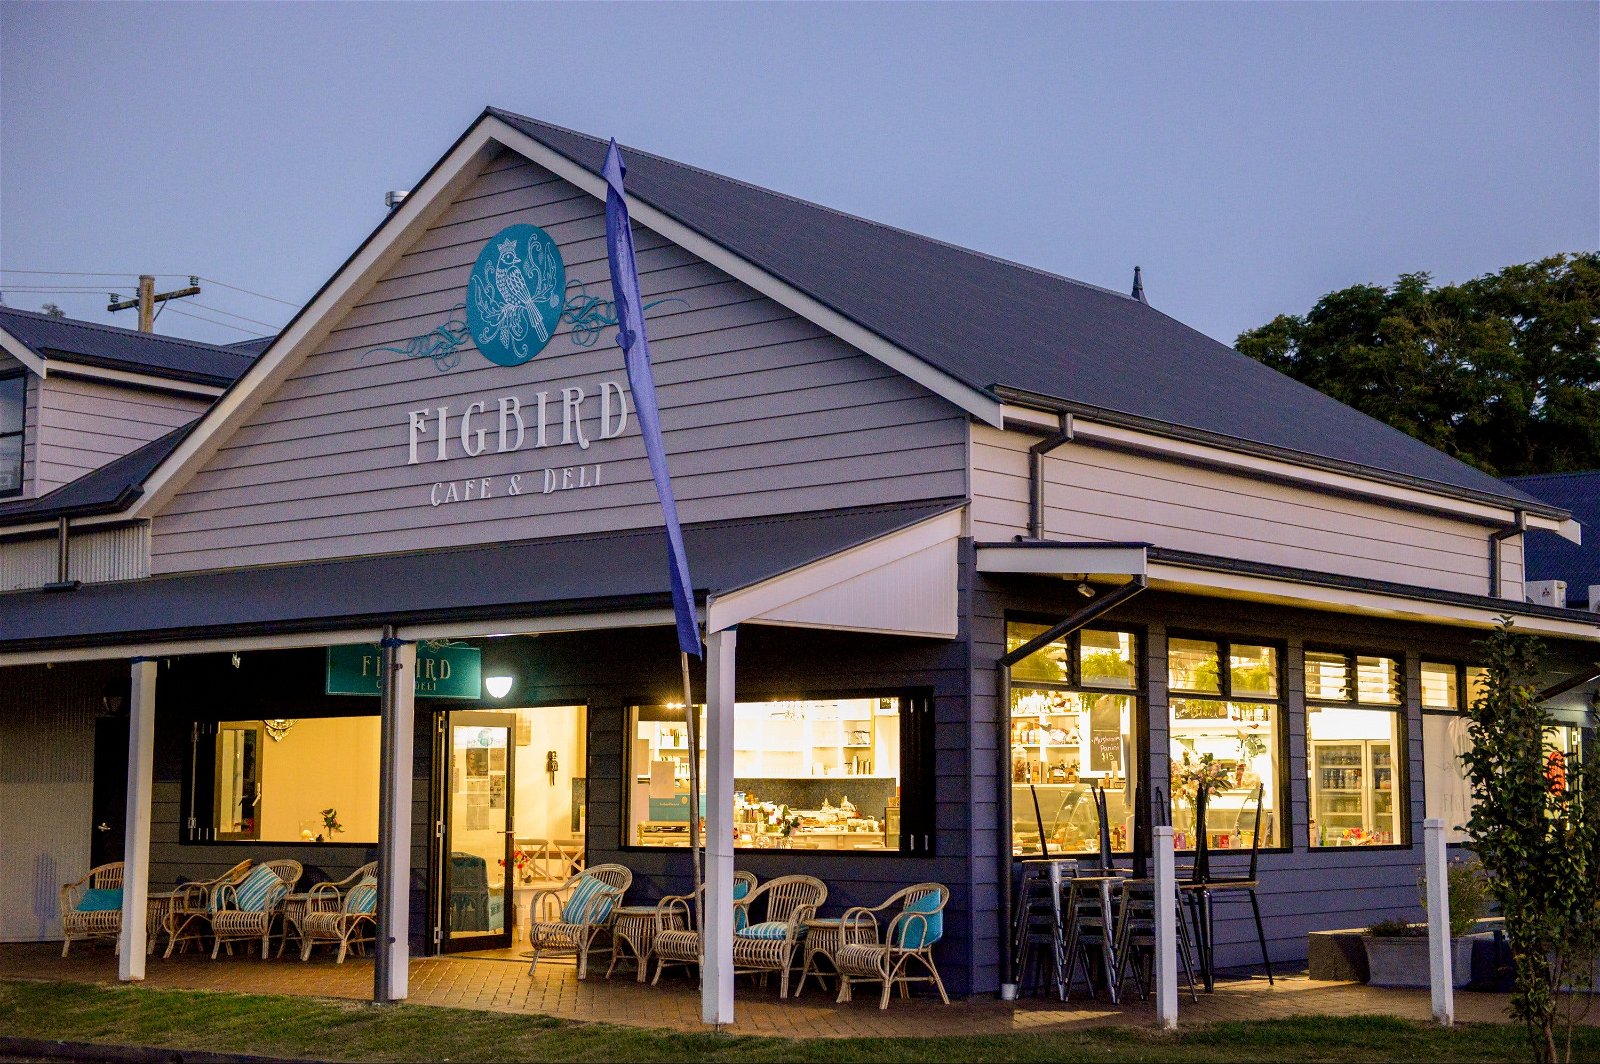 Figbird Cafe and Deli - Surfers Paradise Gold Coast